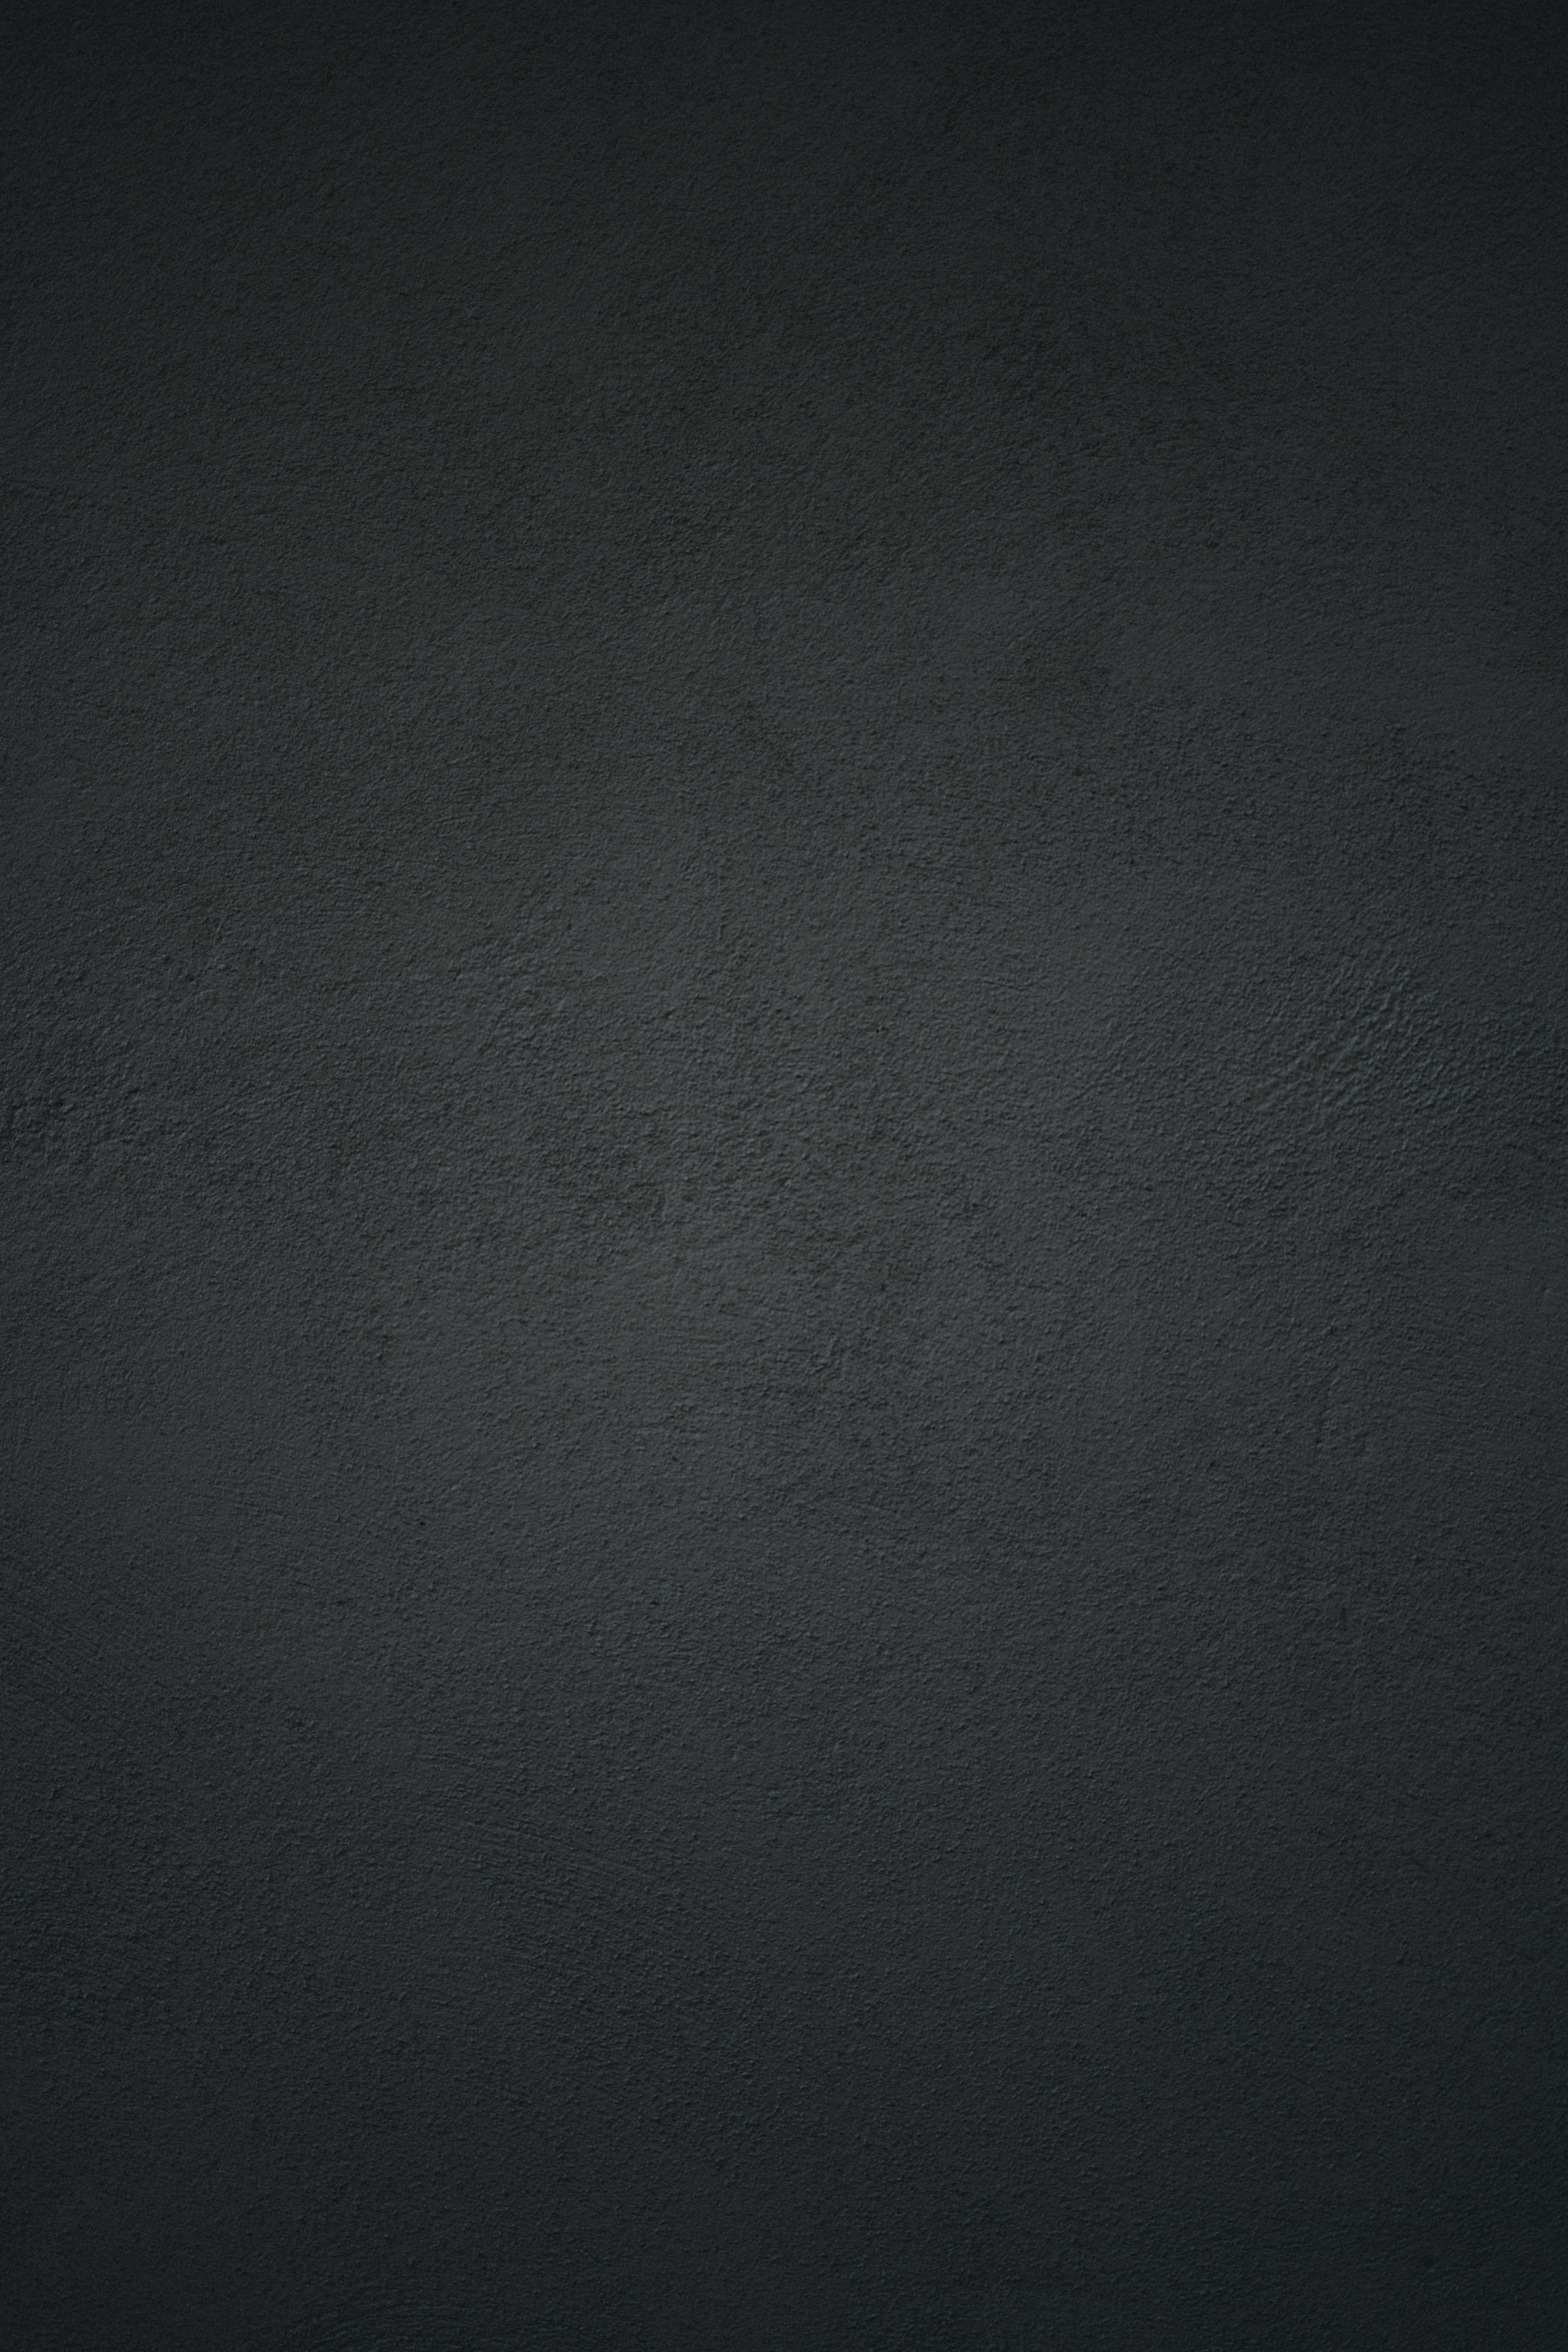 Cool HD Wallpaper textures, grey, surface, relief